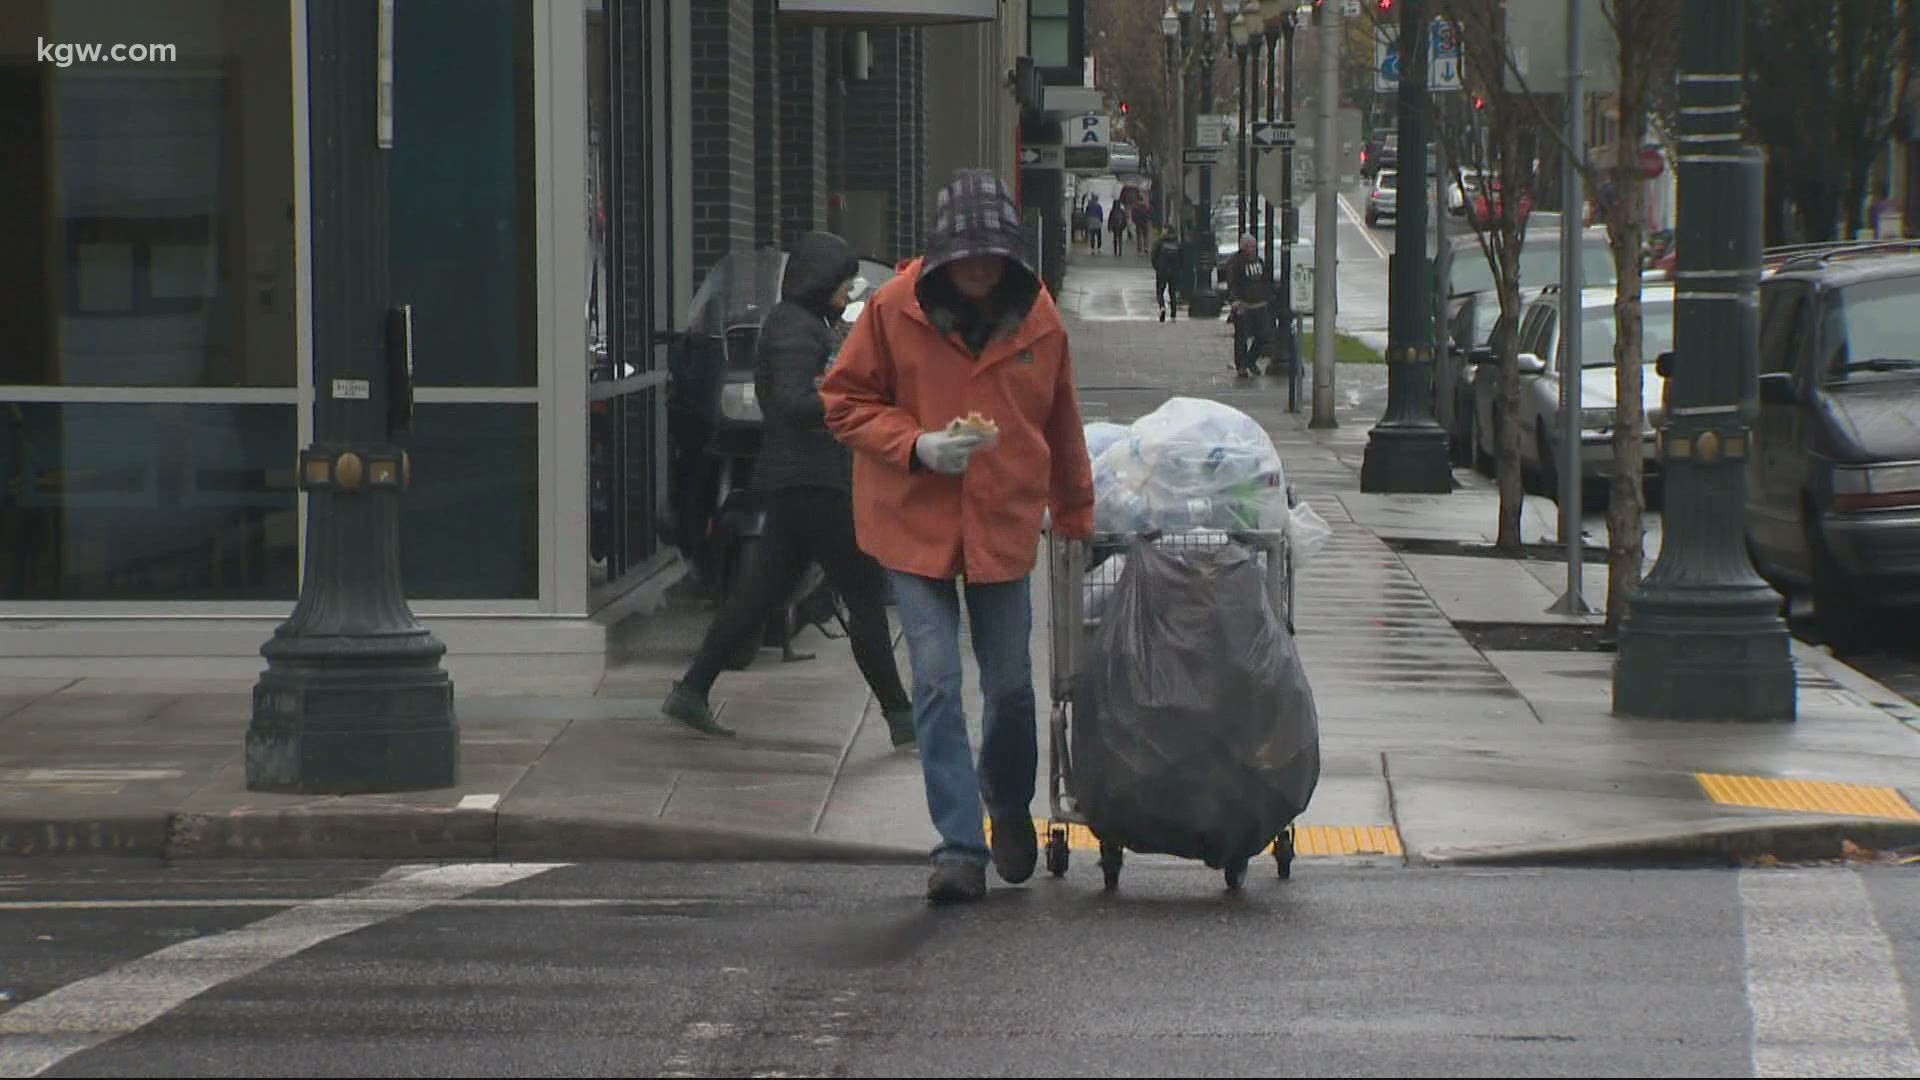 The City of Portland is adding three new winter warming shelters for a total of 275 beds for those experiencing homelessness during the COVID-19 pandemic.